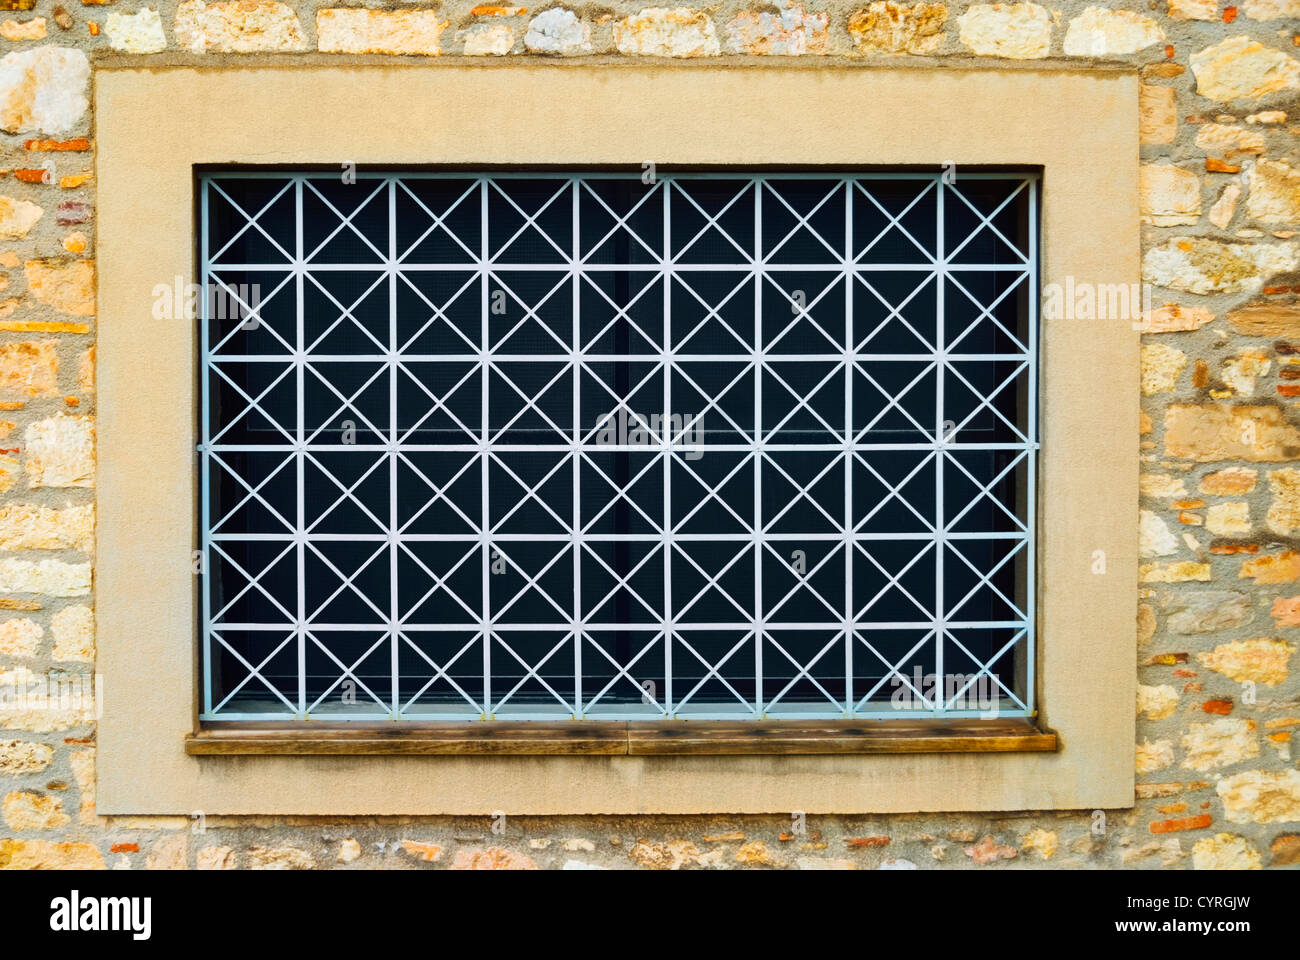 Close-up of a window with grills, Athens, Greece Stock Photo